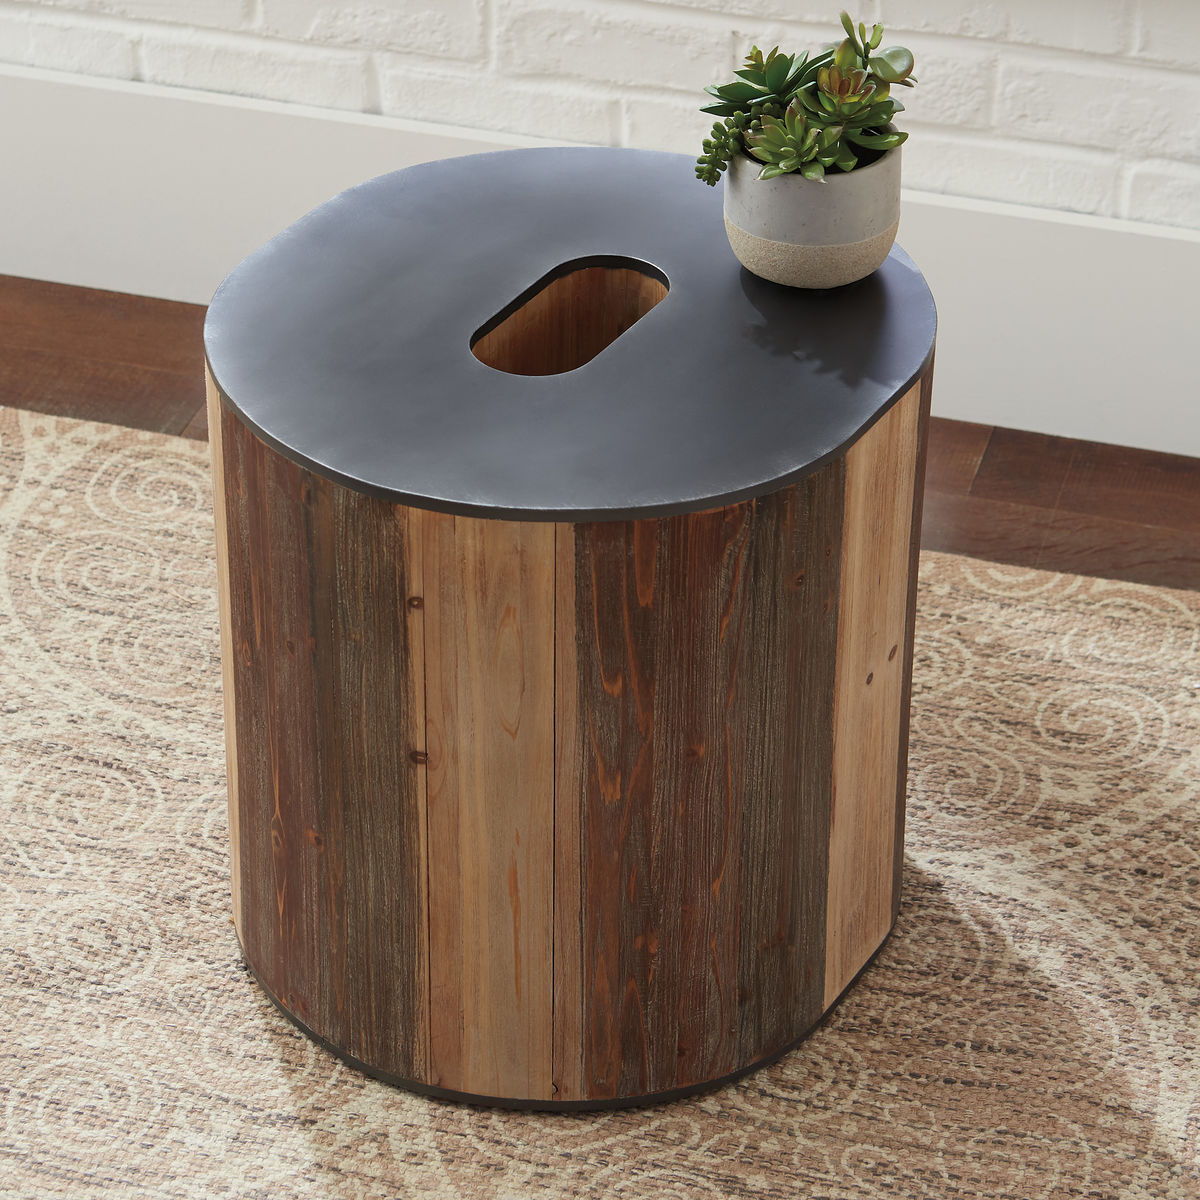 the highmender brown black accent table available logan small outdoor storage box piece garden furniture set transition between tile and carpet tiffany pond lily lamp nautical